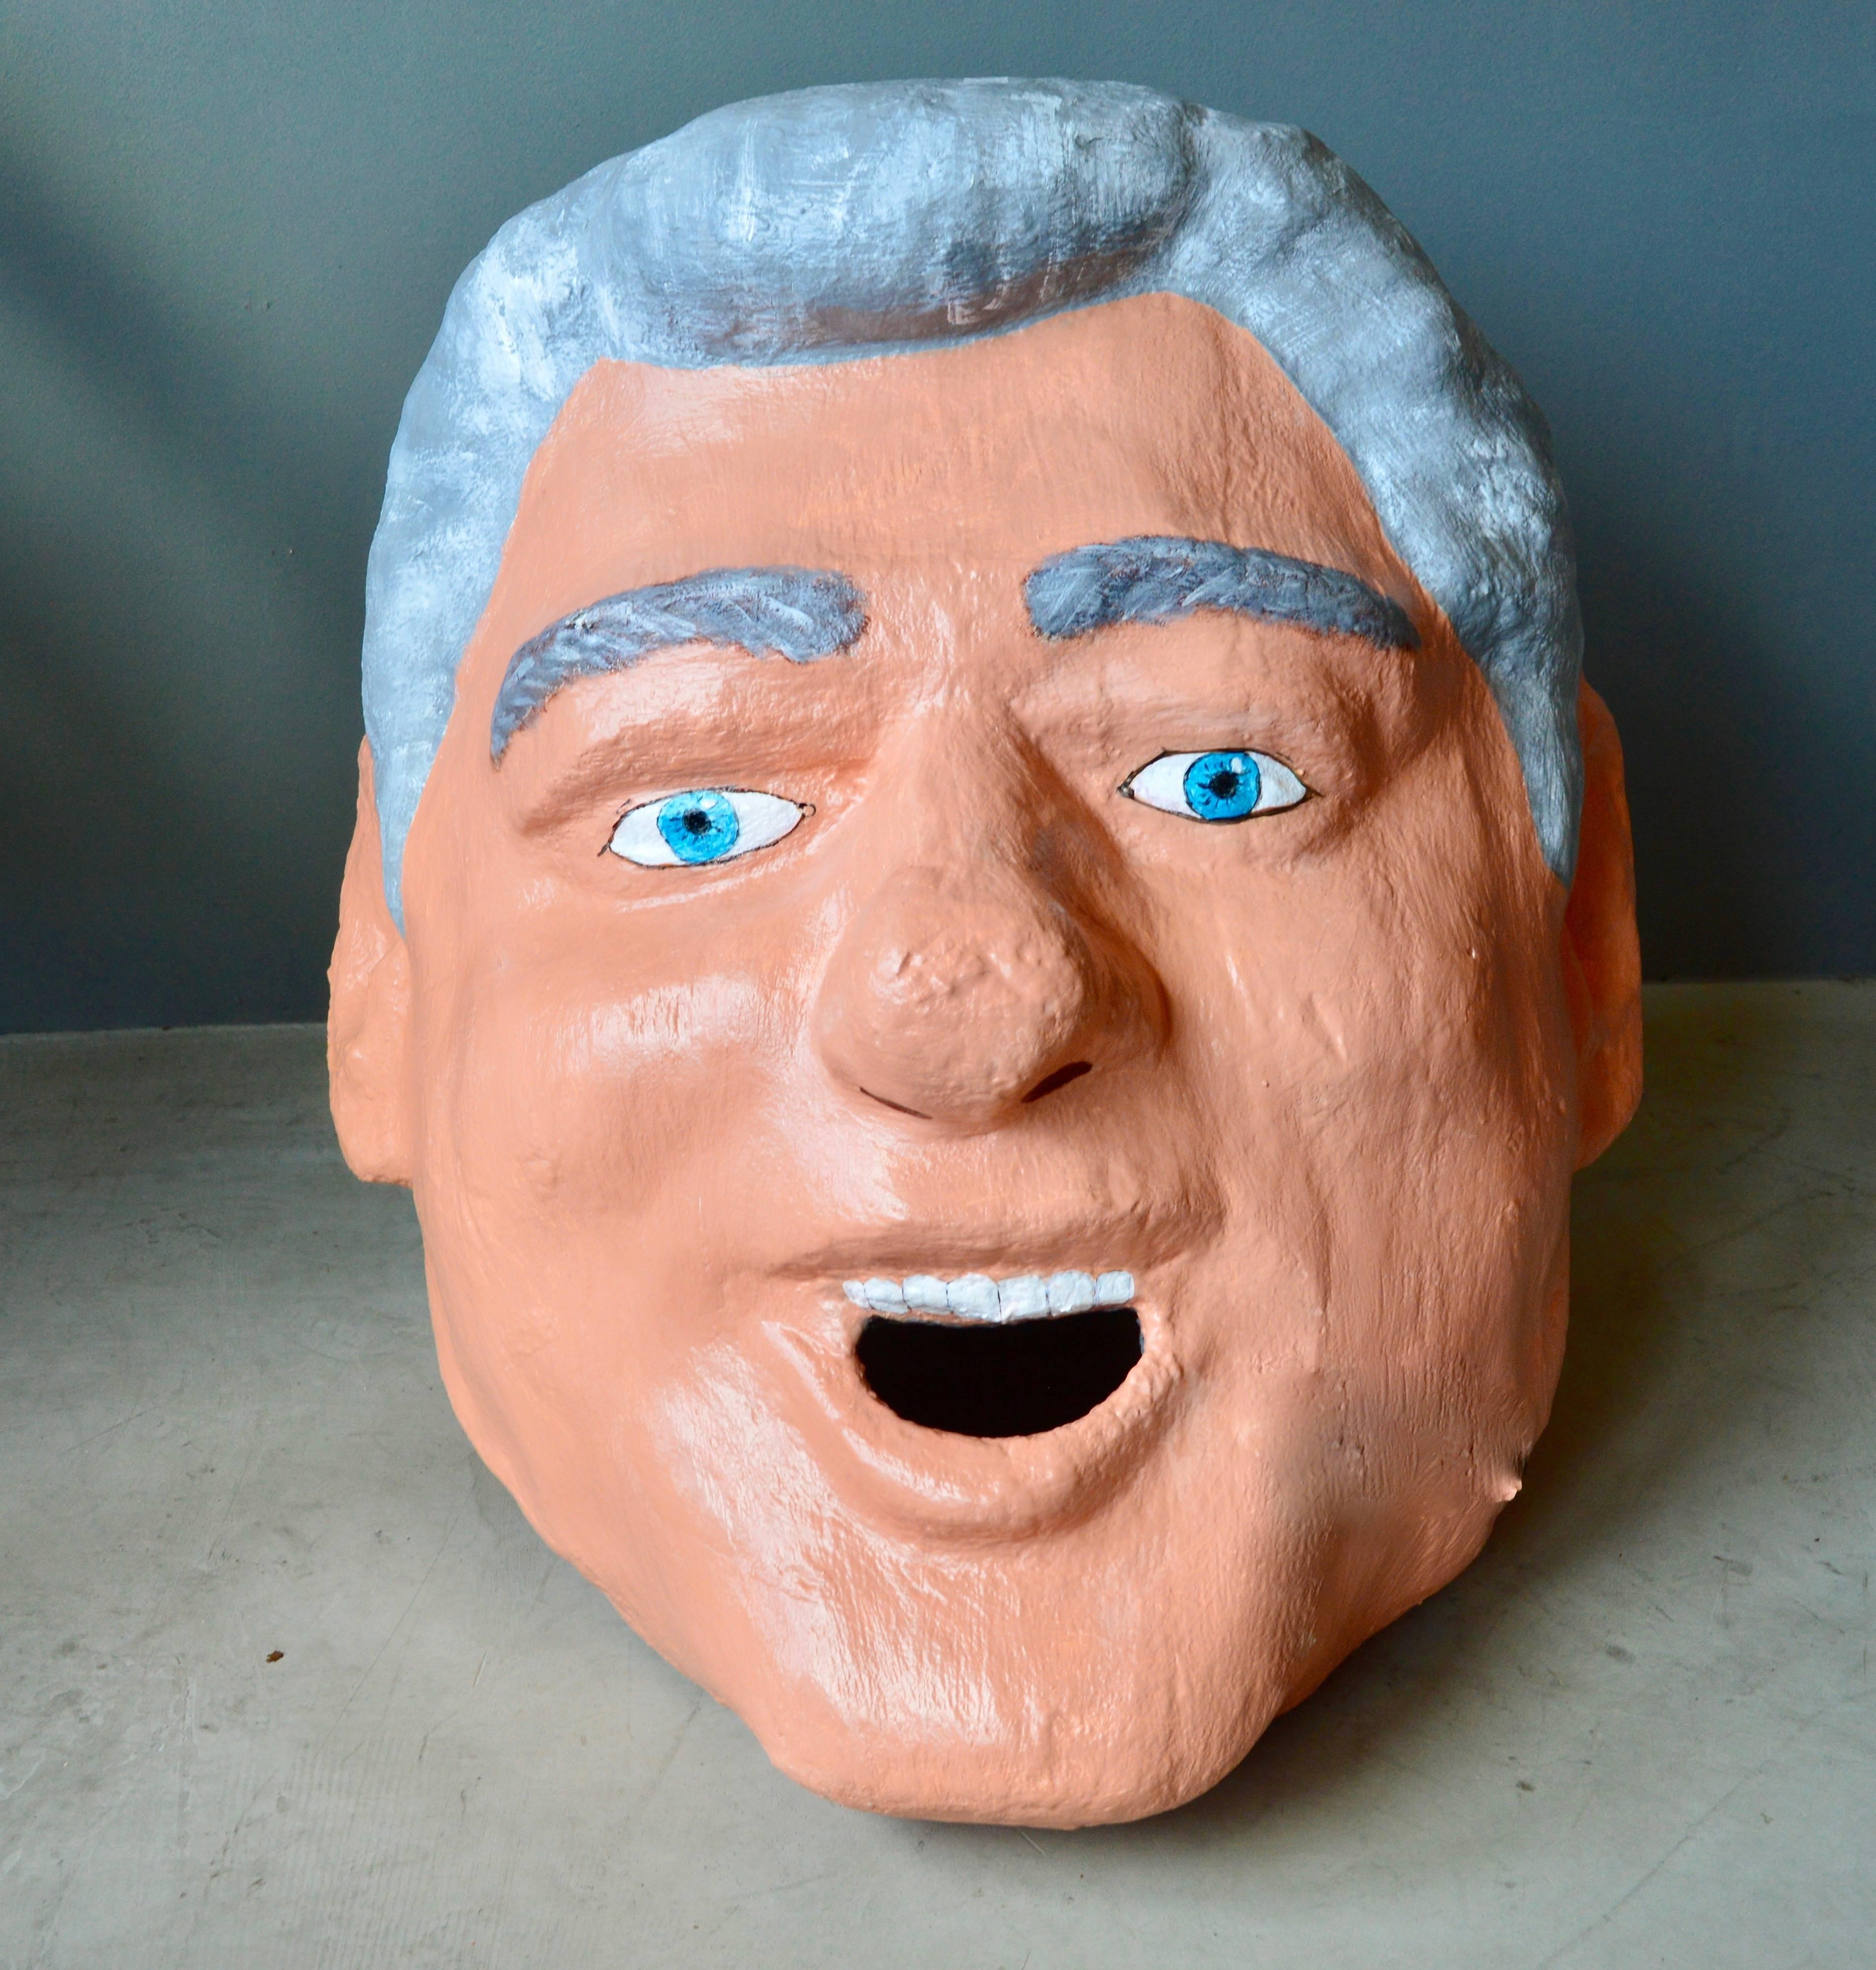 Monumental sculptural head of President Bill Clinton. Made out of foam, paste and hand-painted. Able to be worn on the head. Looks great as a free floating sculpture. Kennedy and George Bush also available. Very unique object.